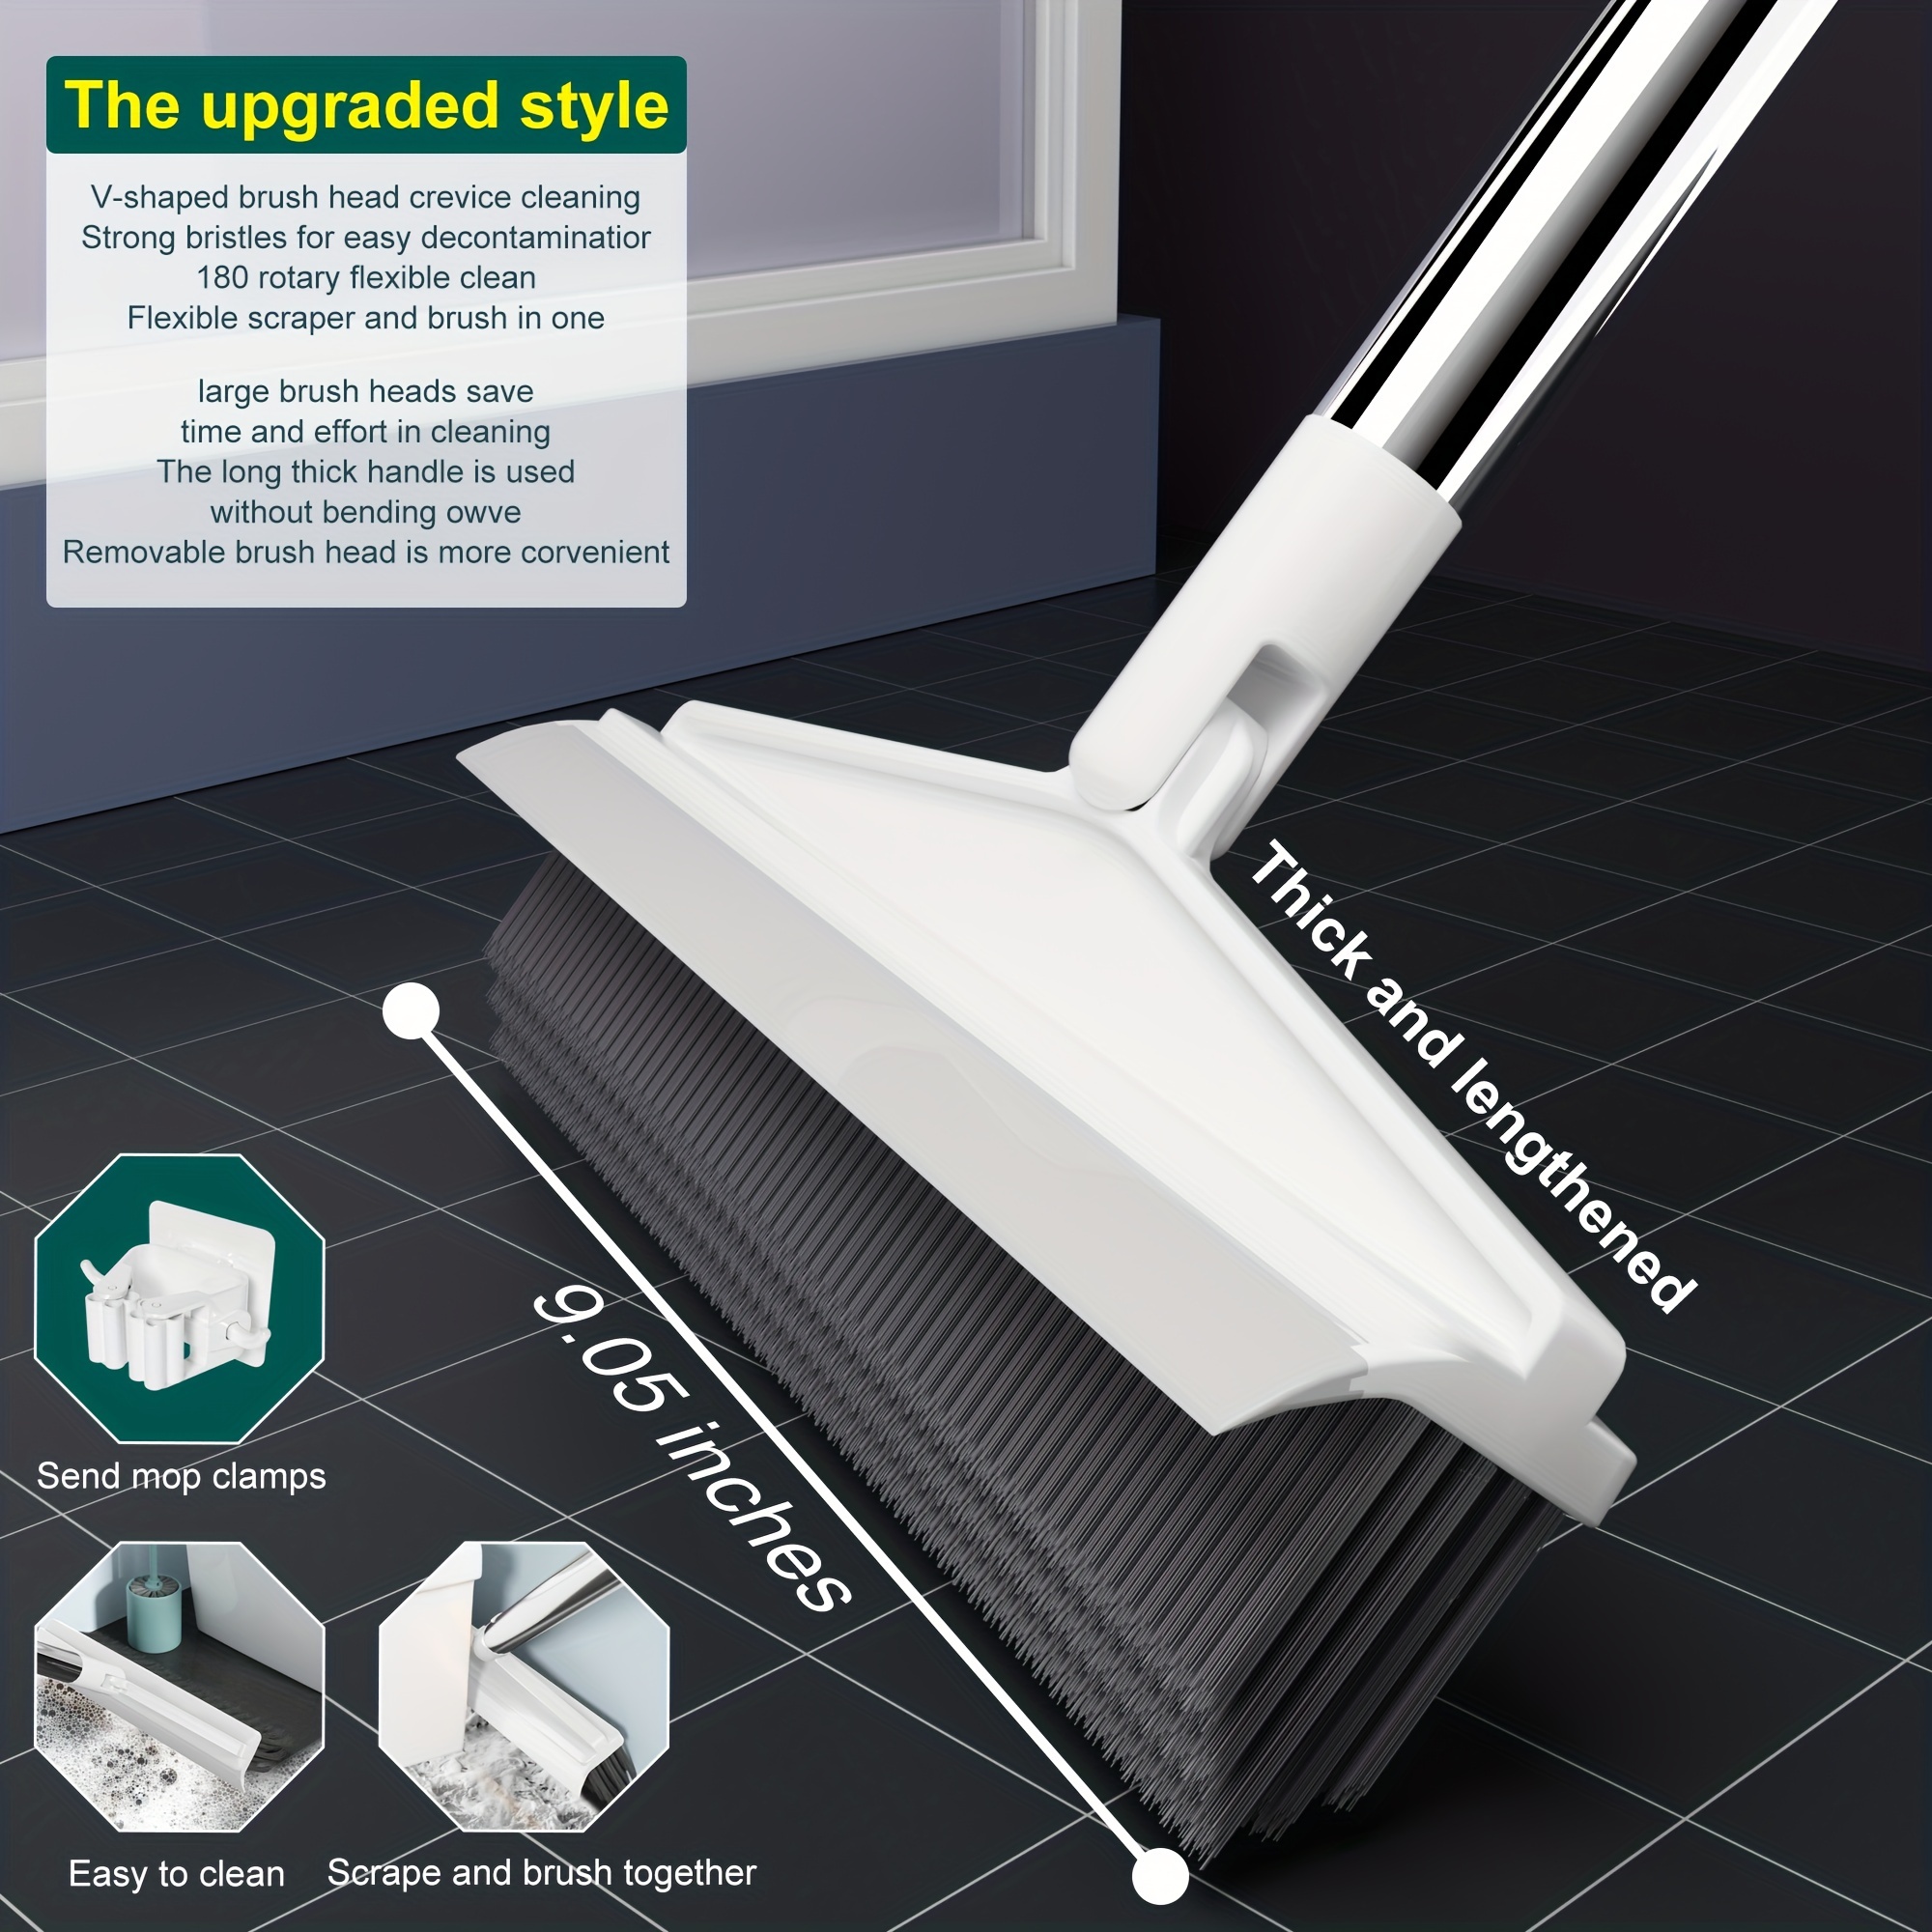 Hard Bristled Crevice Cleaning Brush,Upgraded Gap Crevice Cleaning